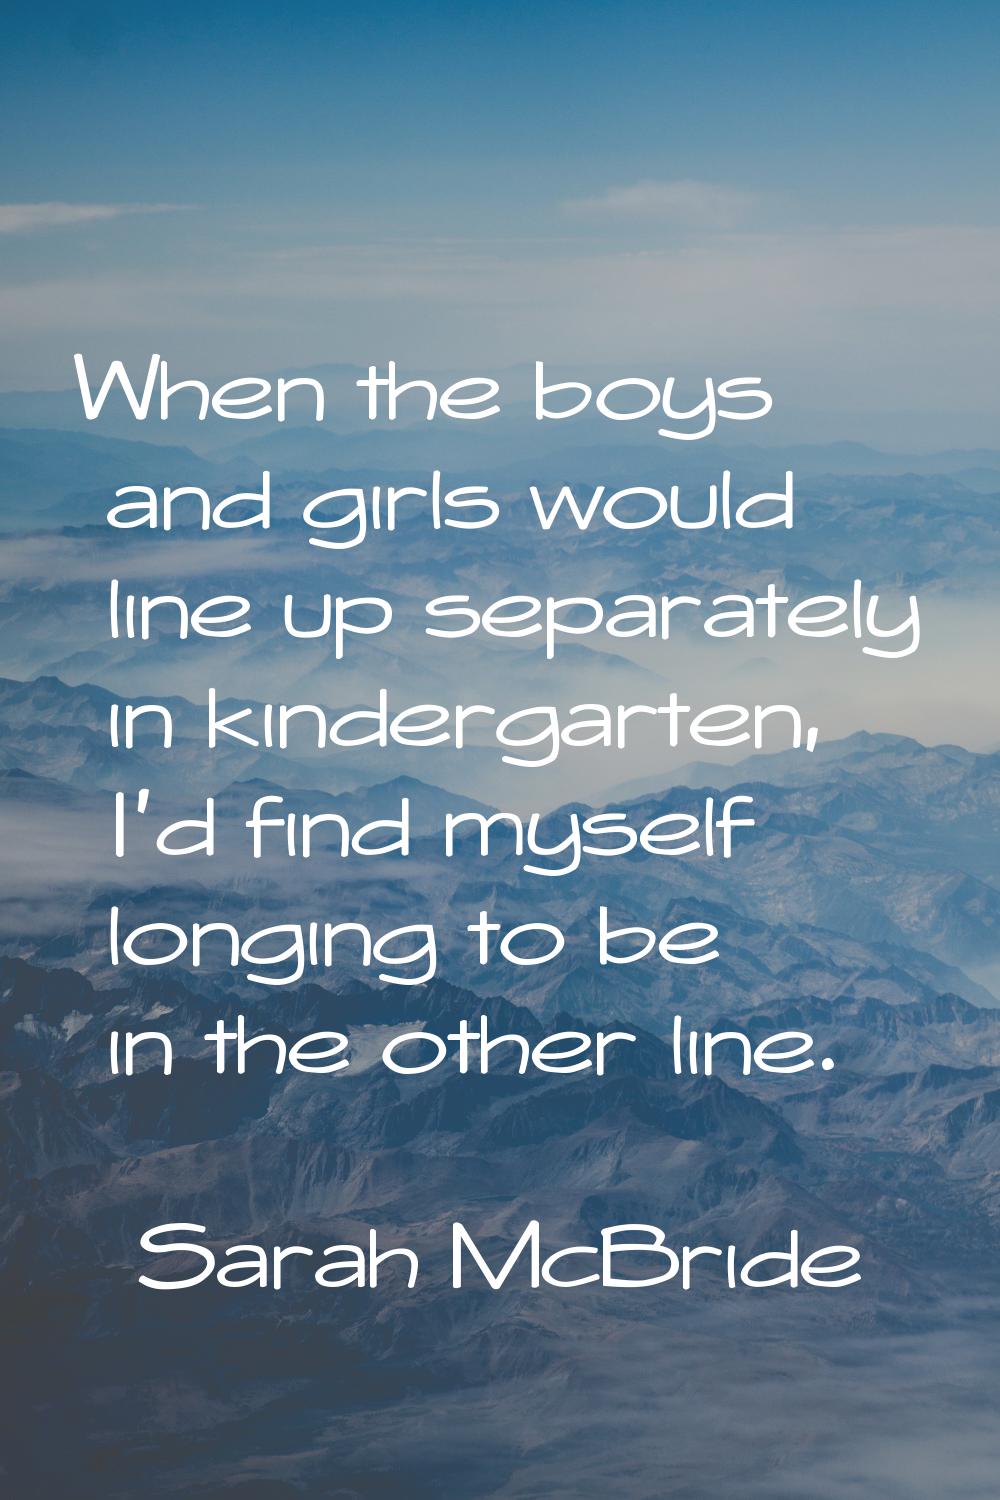 When the boys and girls would line up separately in kindergarten, I'd find myself longing to be in 